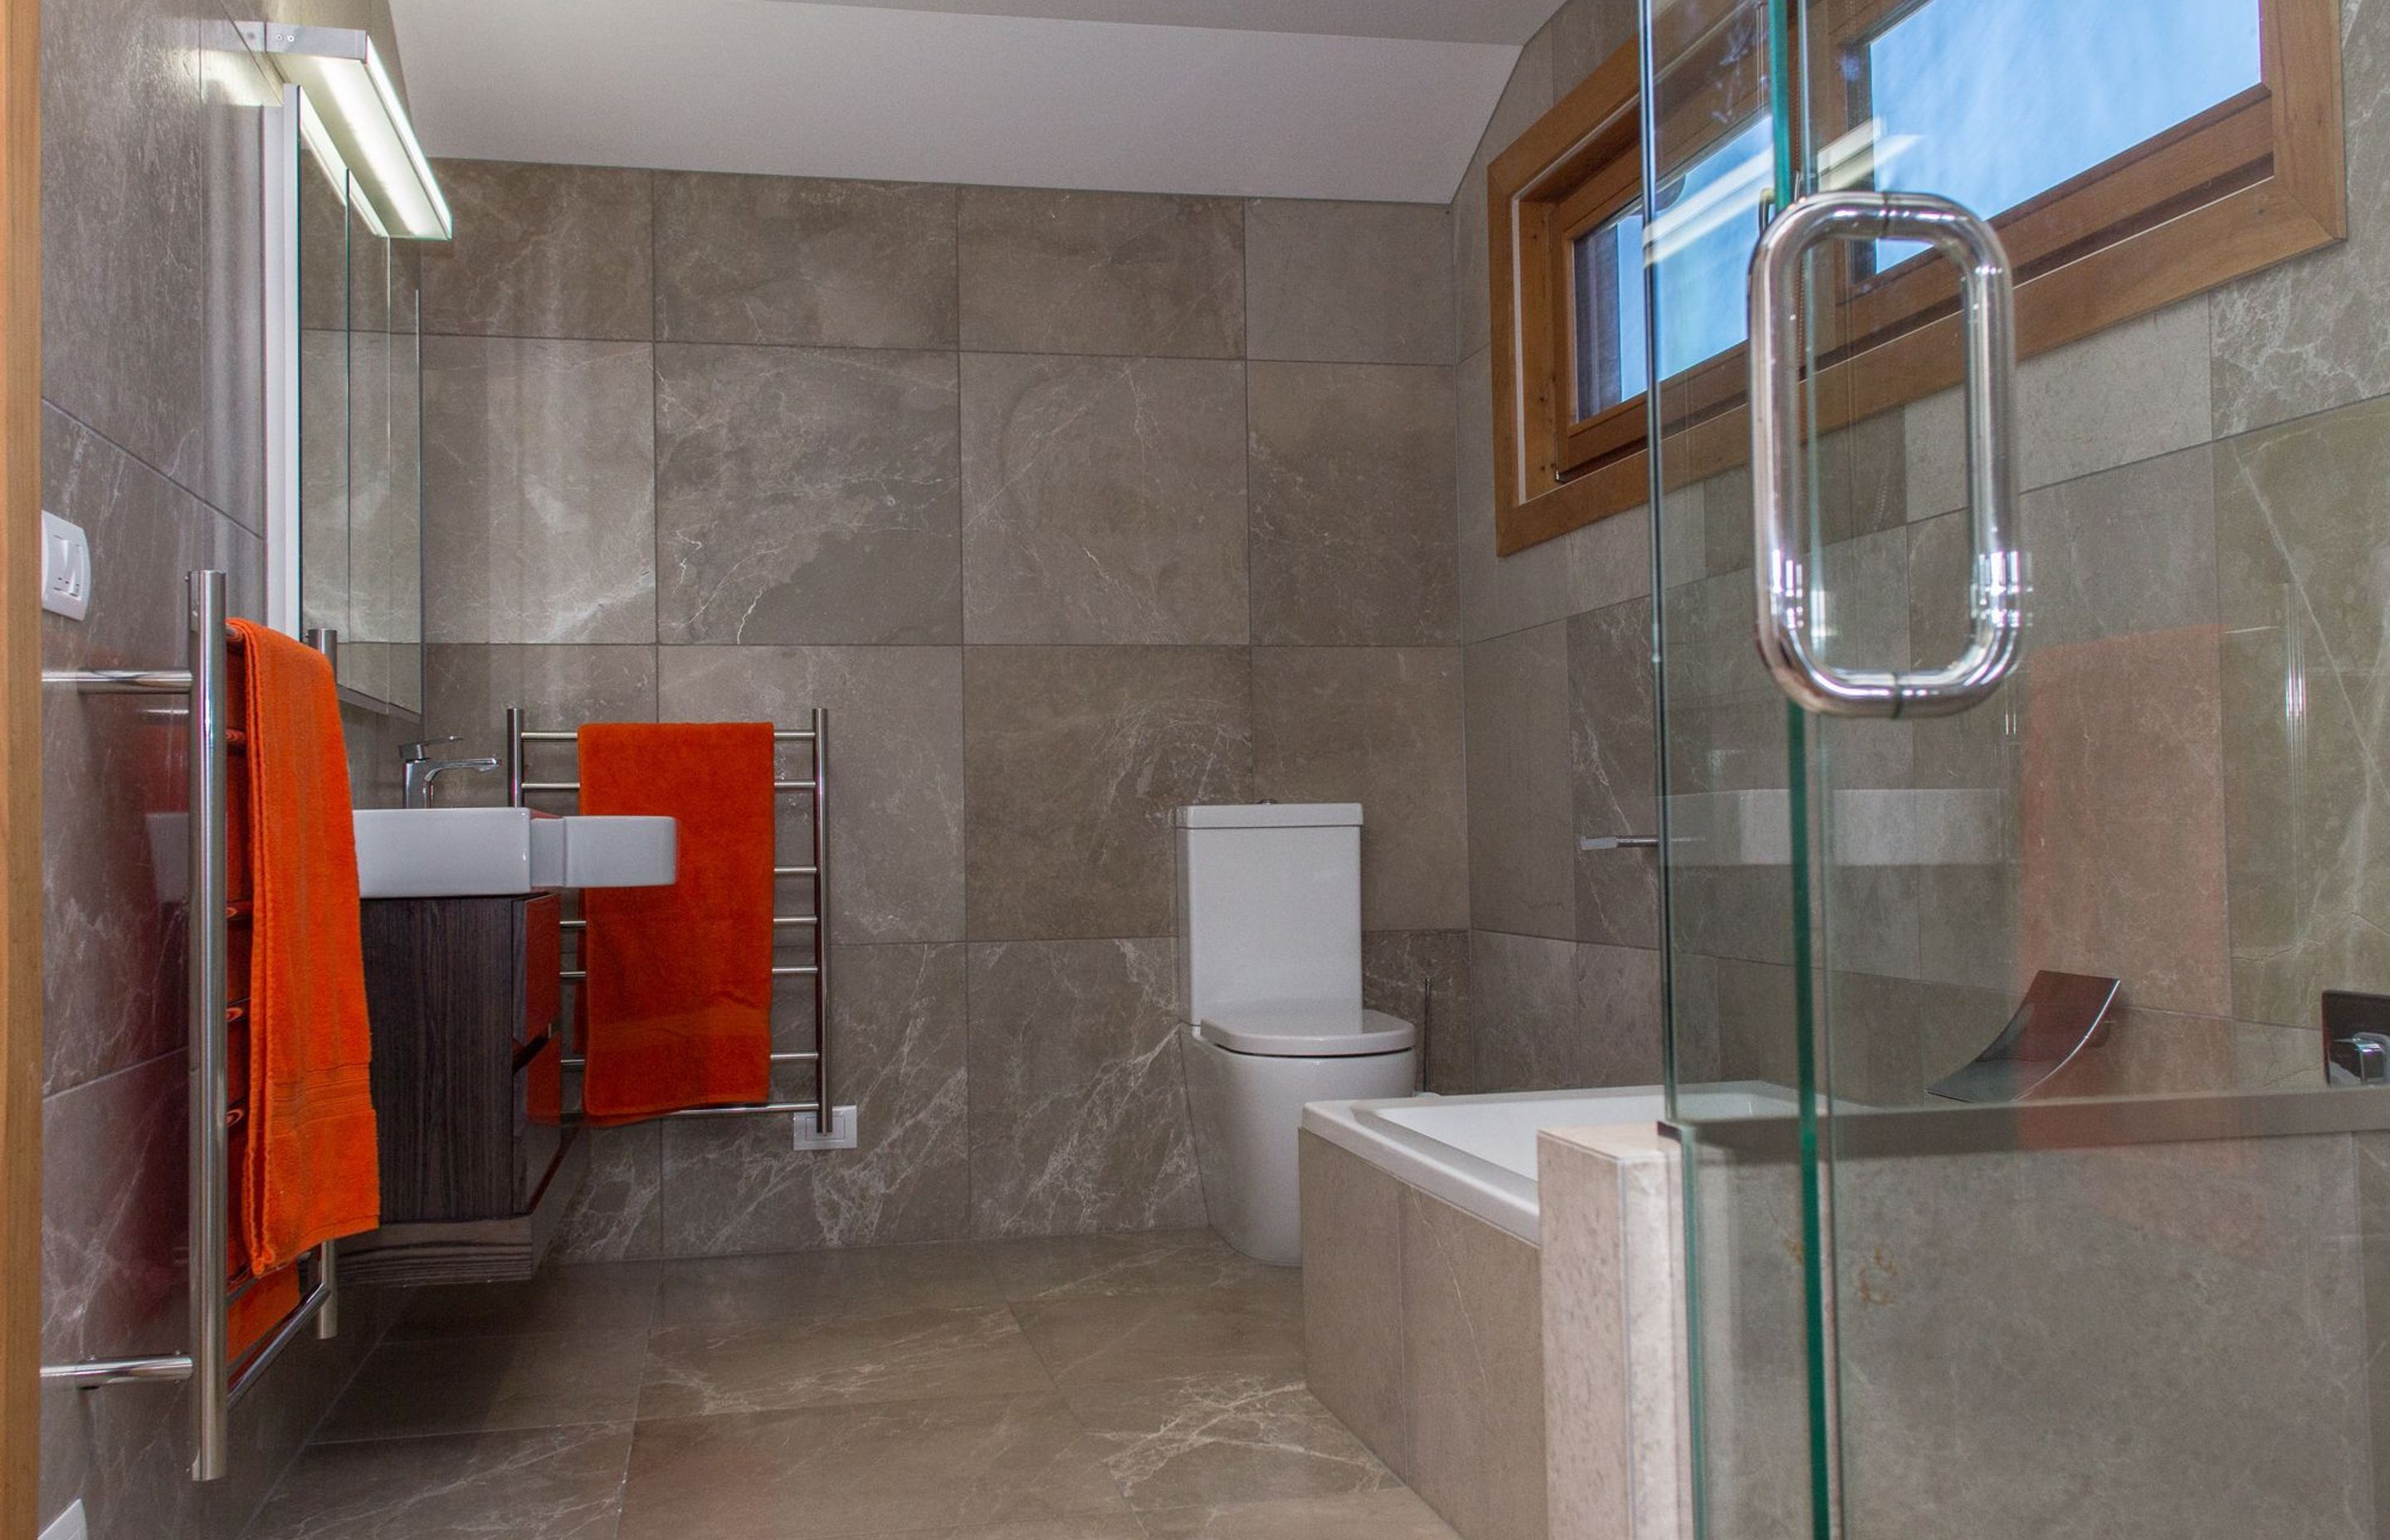 Well appointed bathrooms enhance the quality of the home.